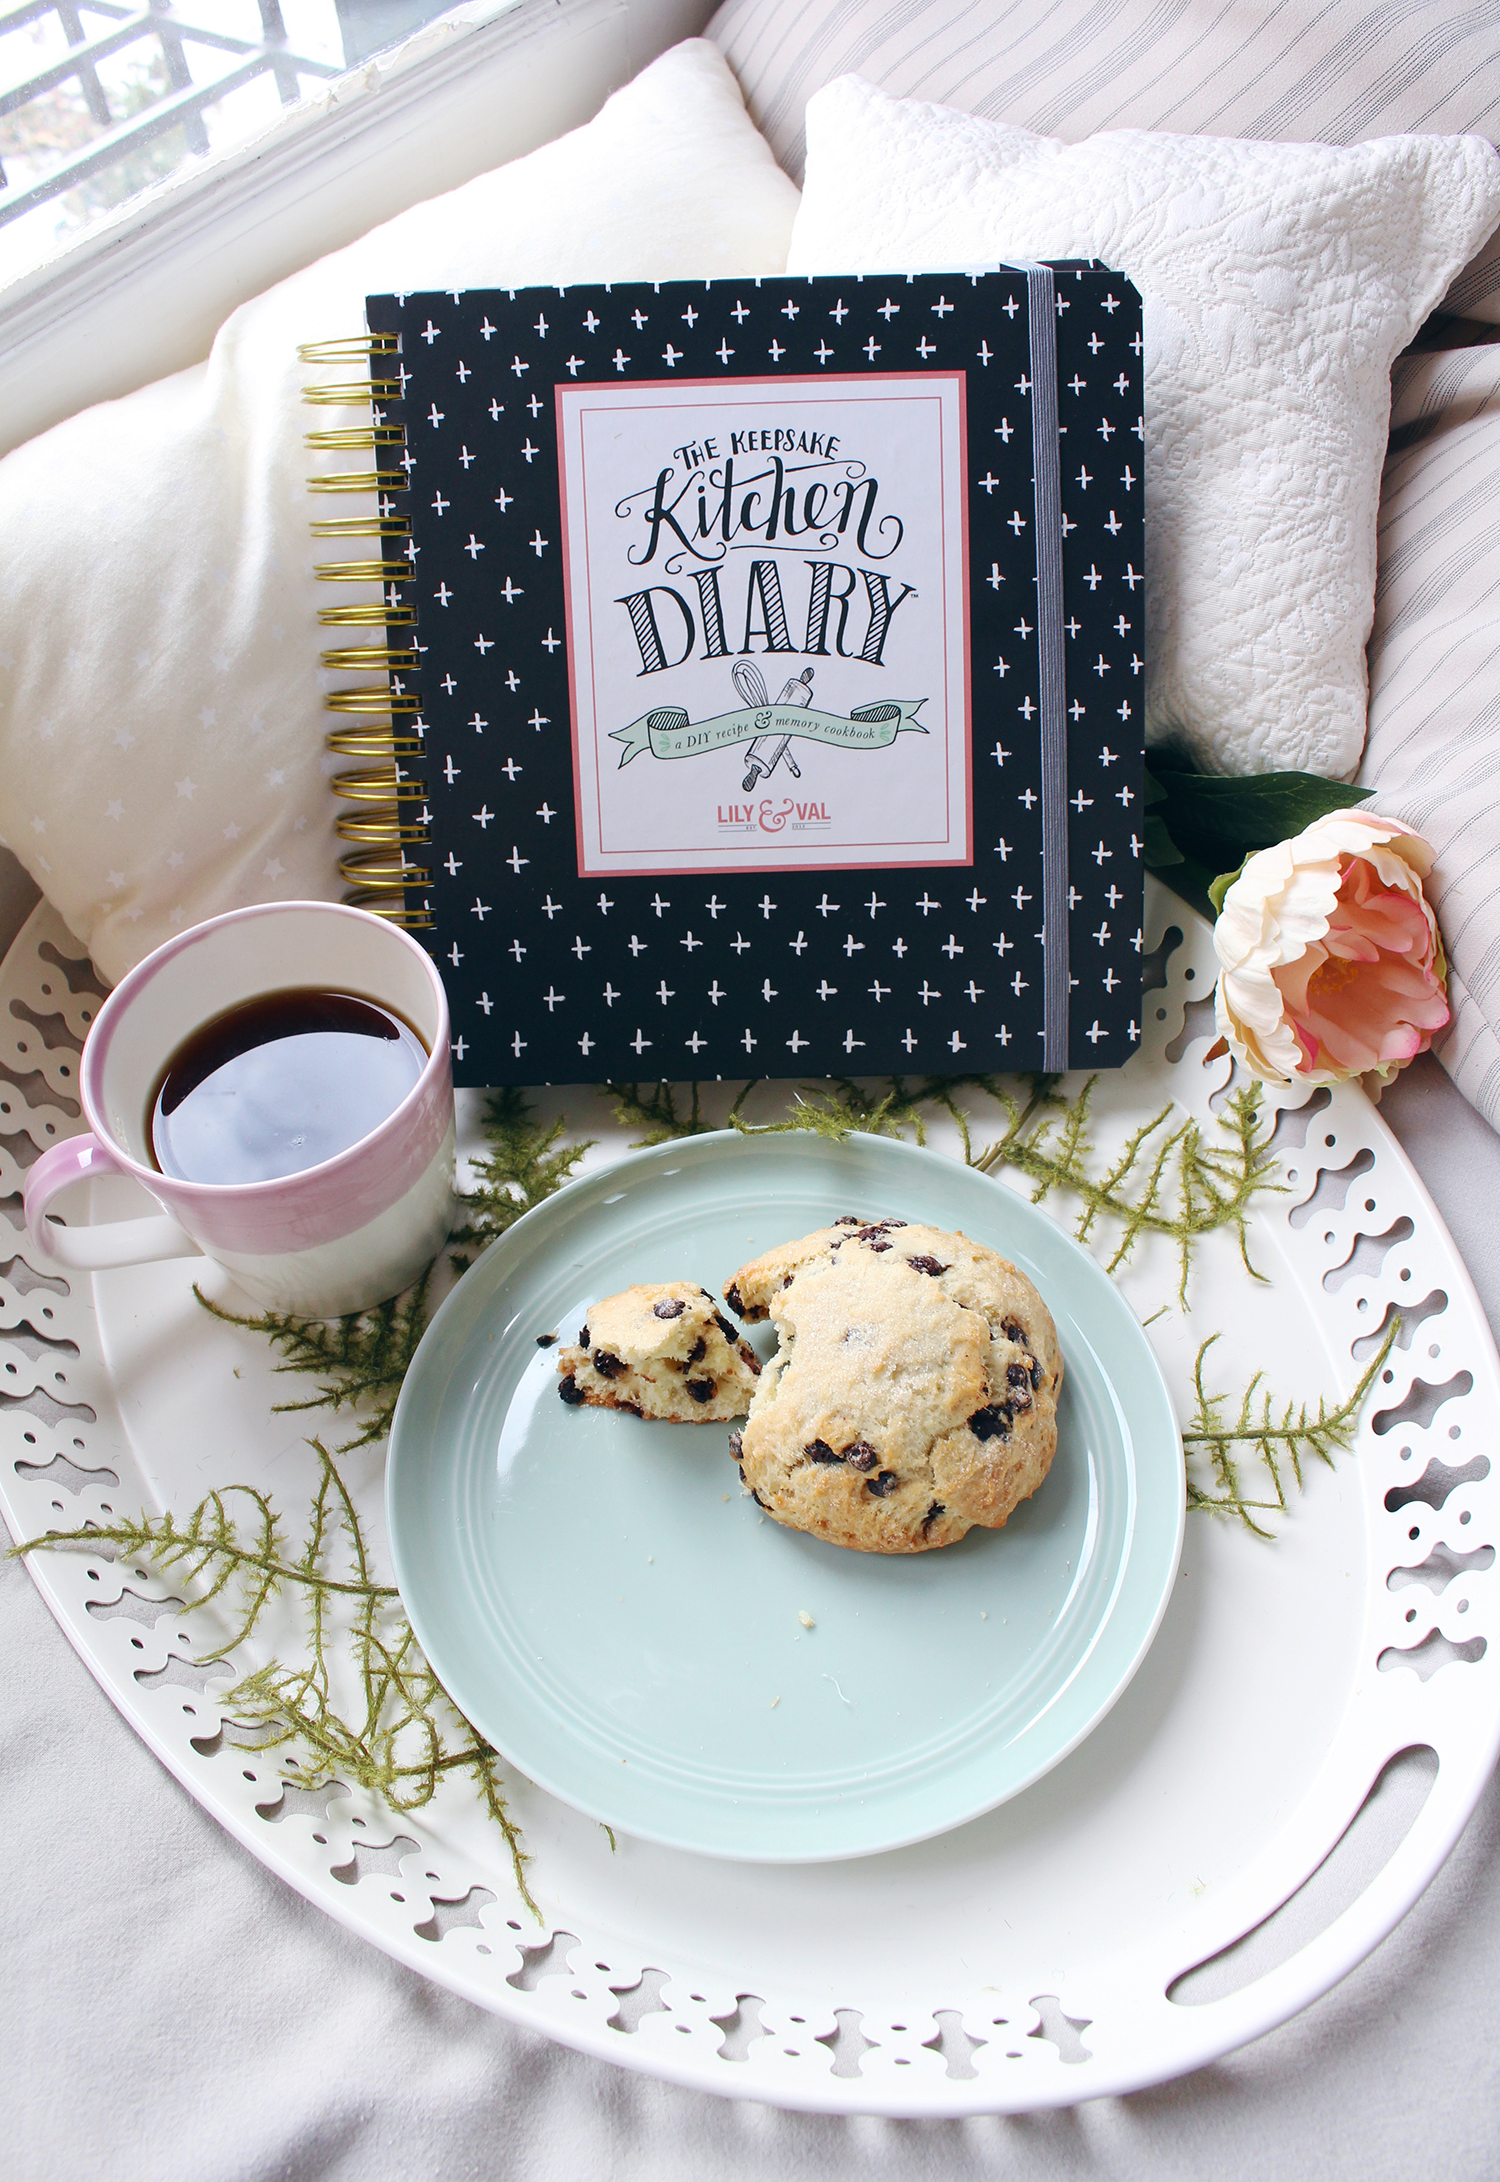 The Keepsake Kitchen Diary is an heirloom recipe keeper and journal with room to record recipes along with the memories that coincide with them